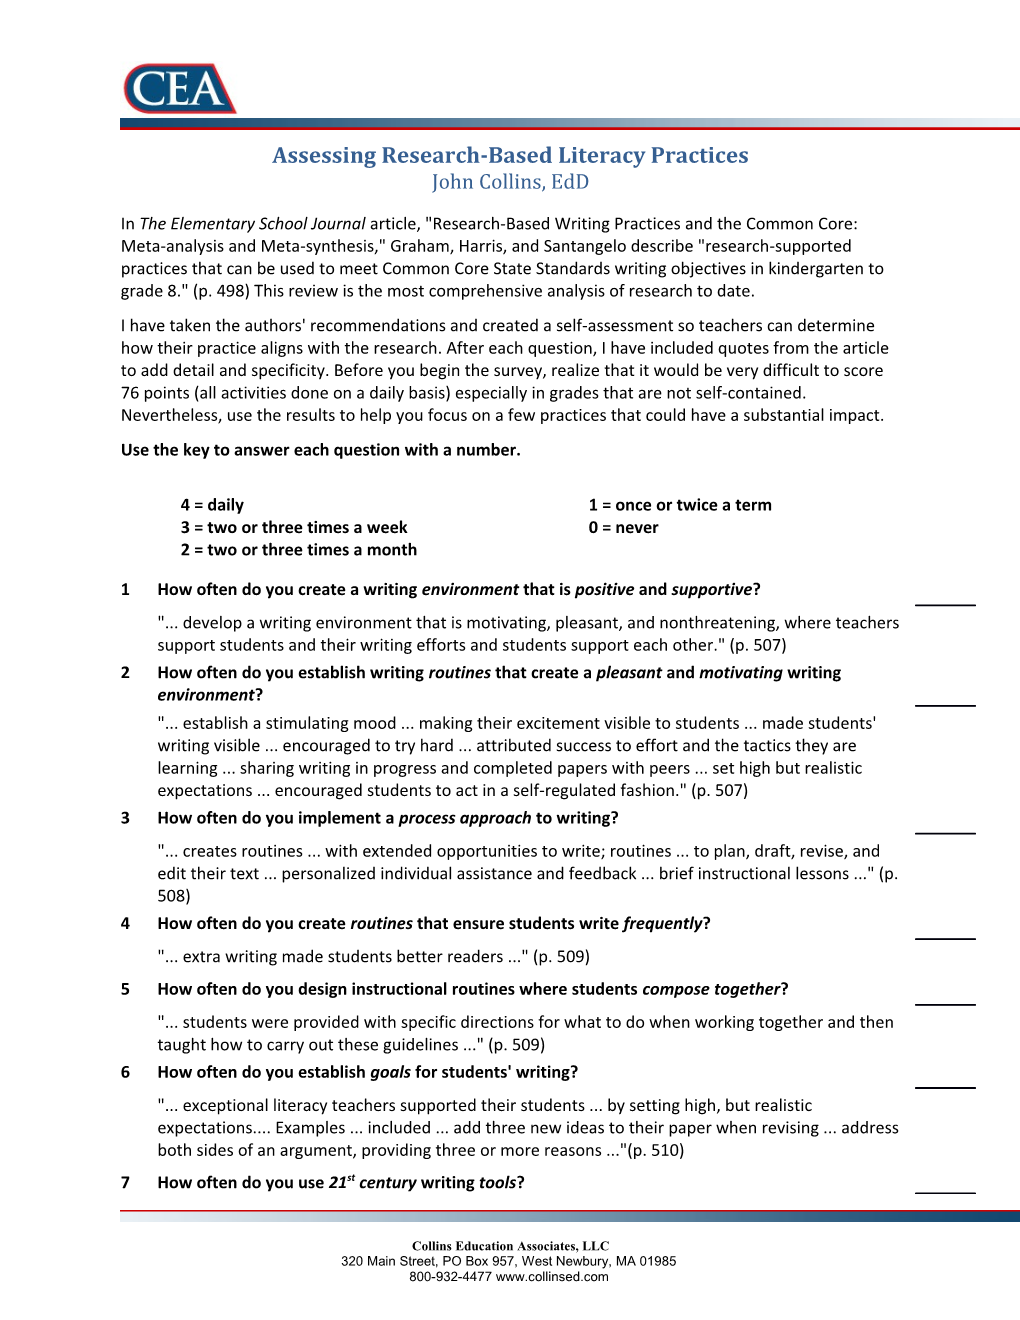 Assessing Research-Based Literacy Practices